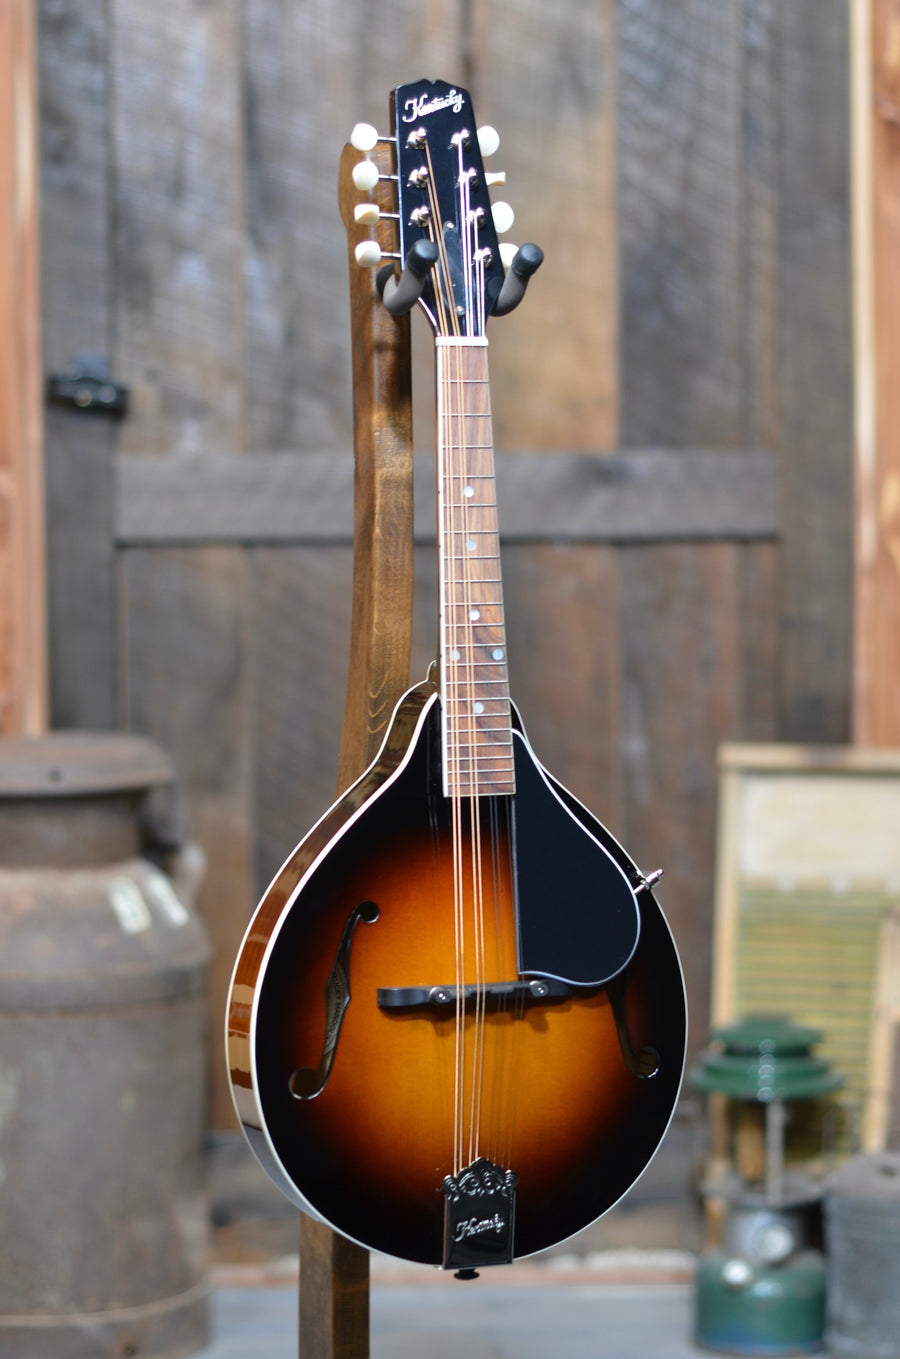 Kentucky KM-140 A-Style Mandolin With Case